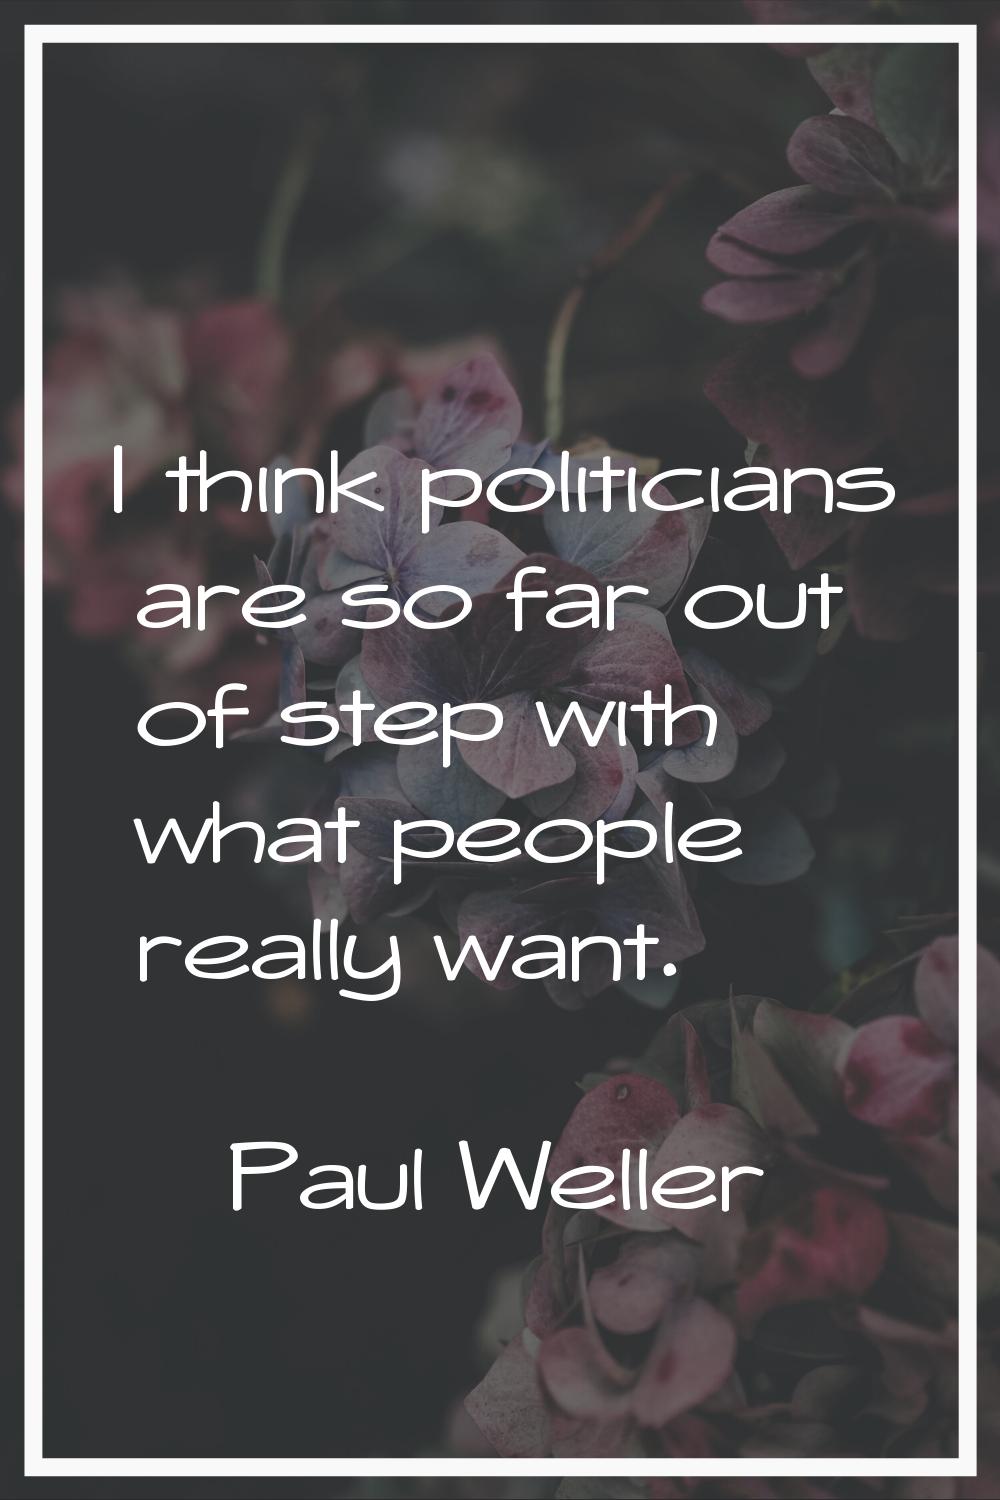 I think politicians are so far out of step with what people really want.